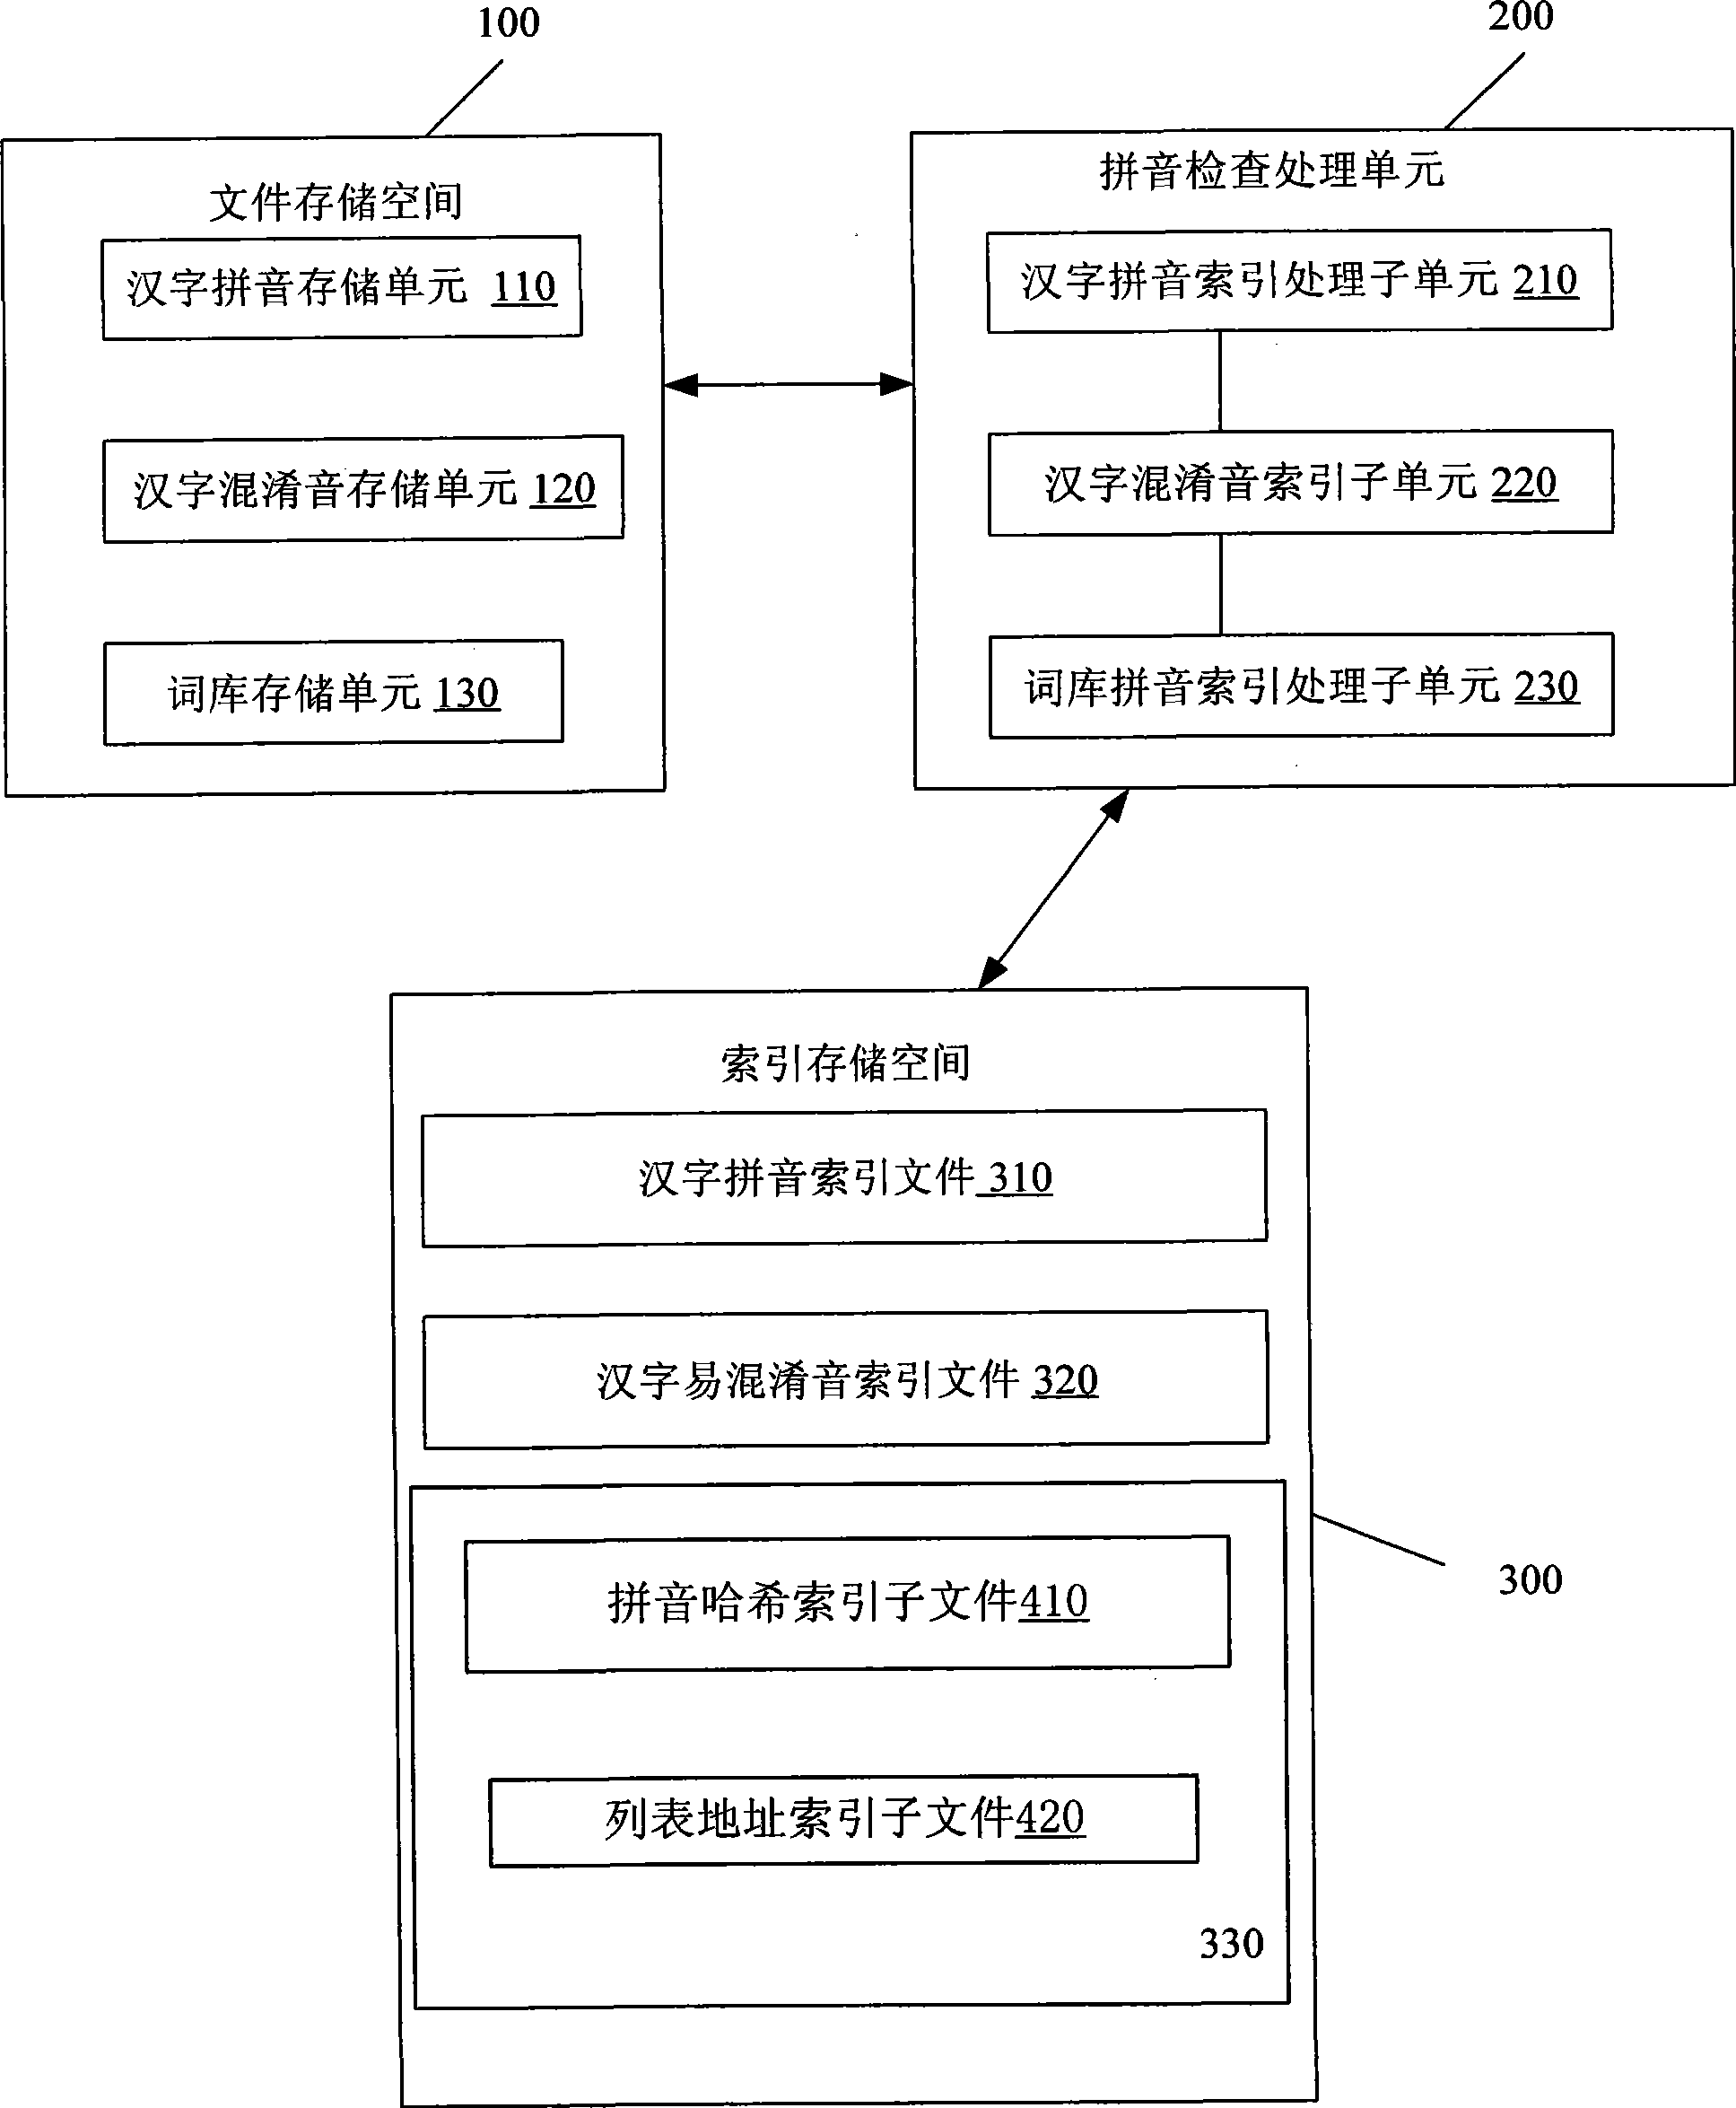 Phonetic check system and method with easy confusion tone recognition